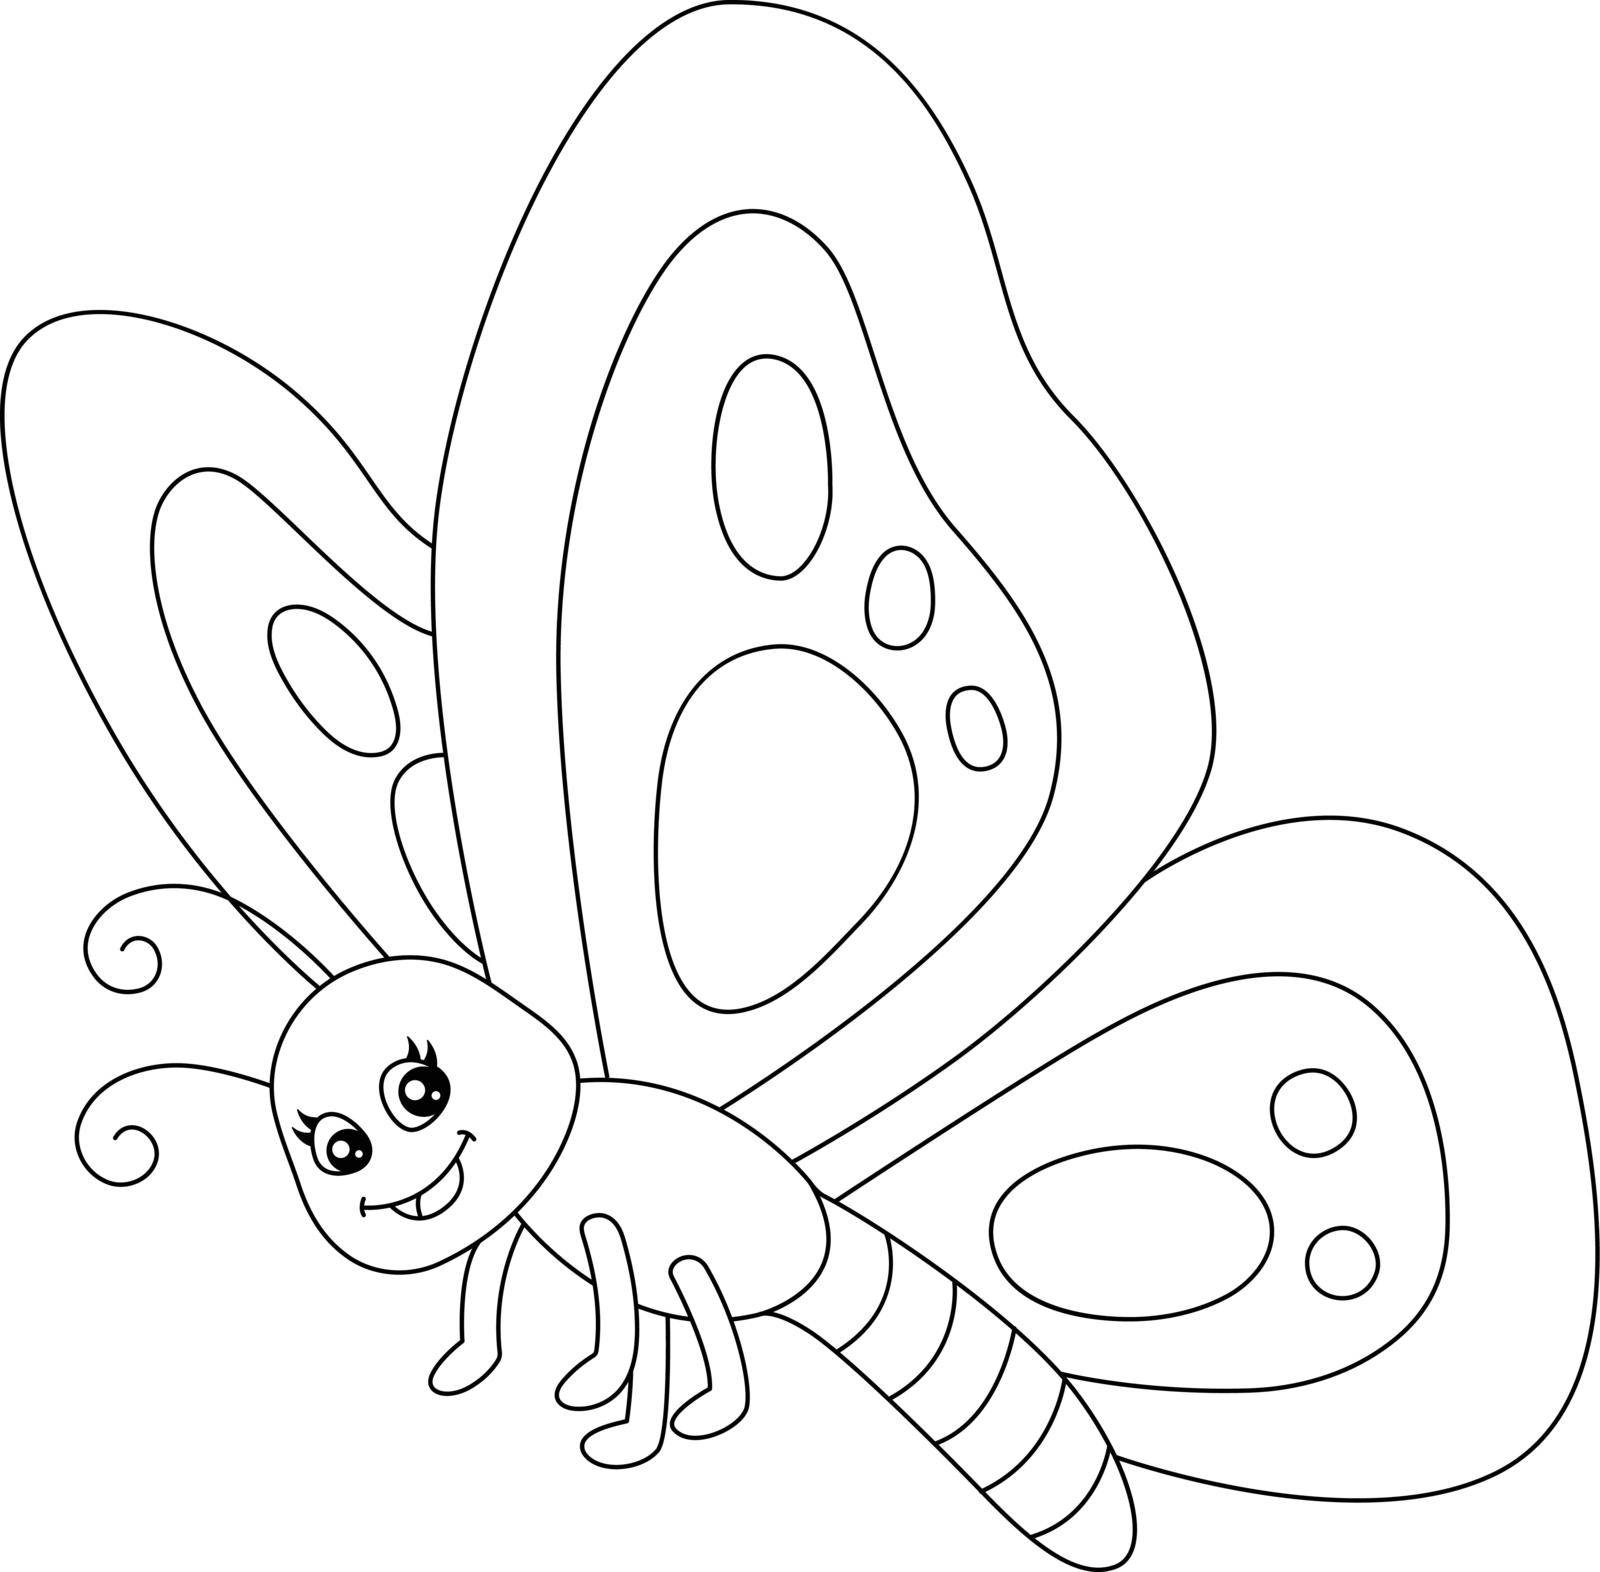 Butterfly Coloring Page Isolated for Kids by abbydesign